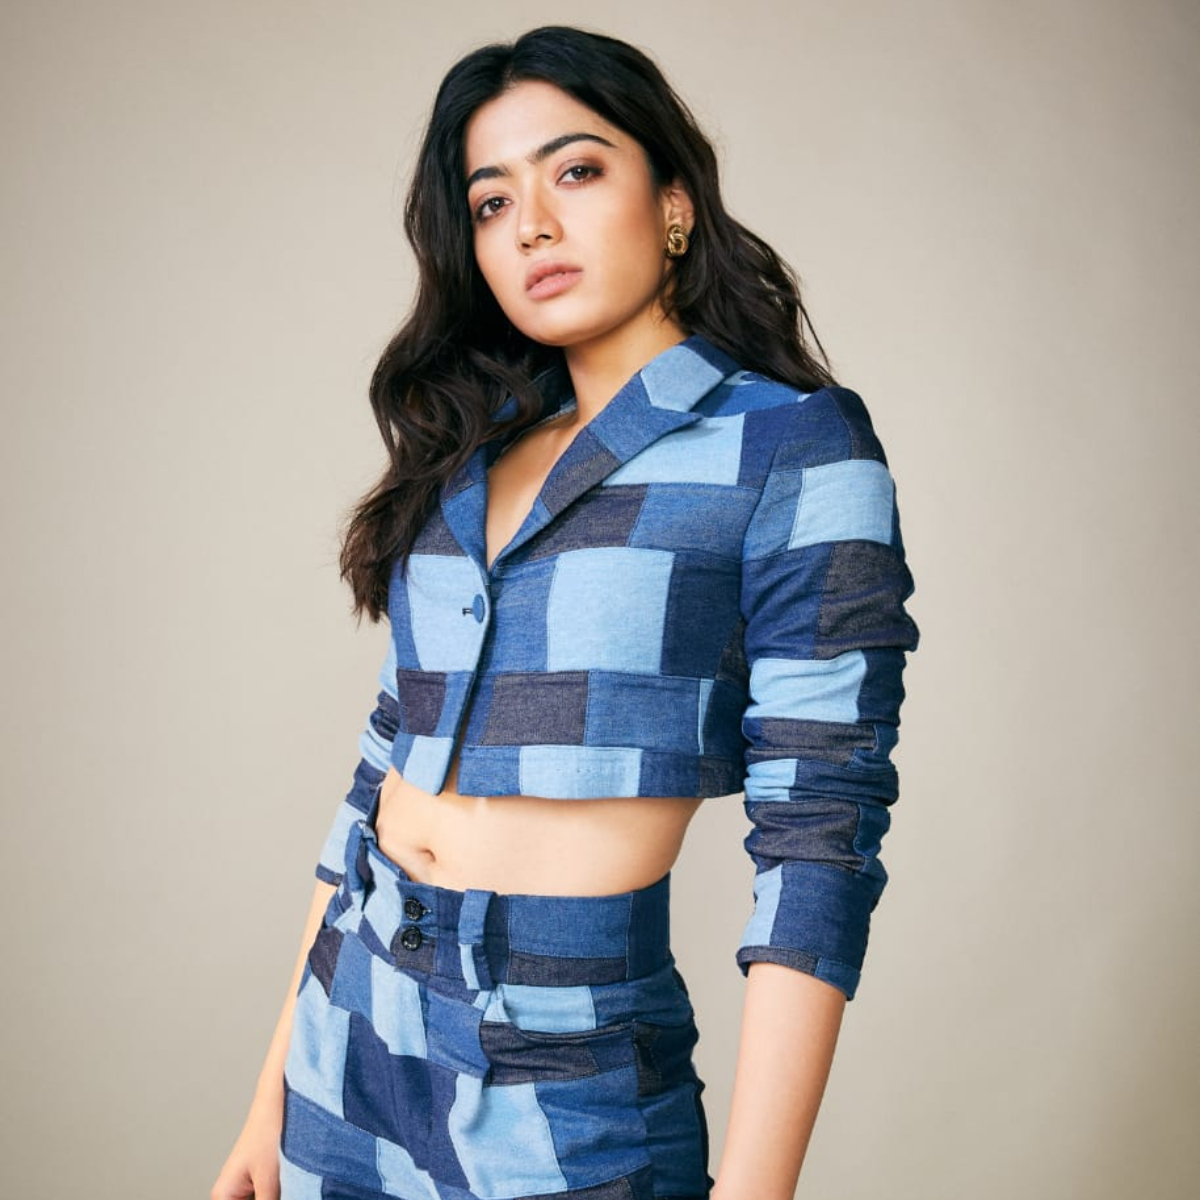 EXCLUSIVE: Rashmika Mandanna reveals her birthday plans; Says feels grateful and has no complaints